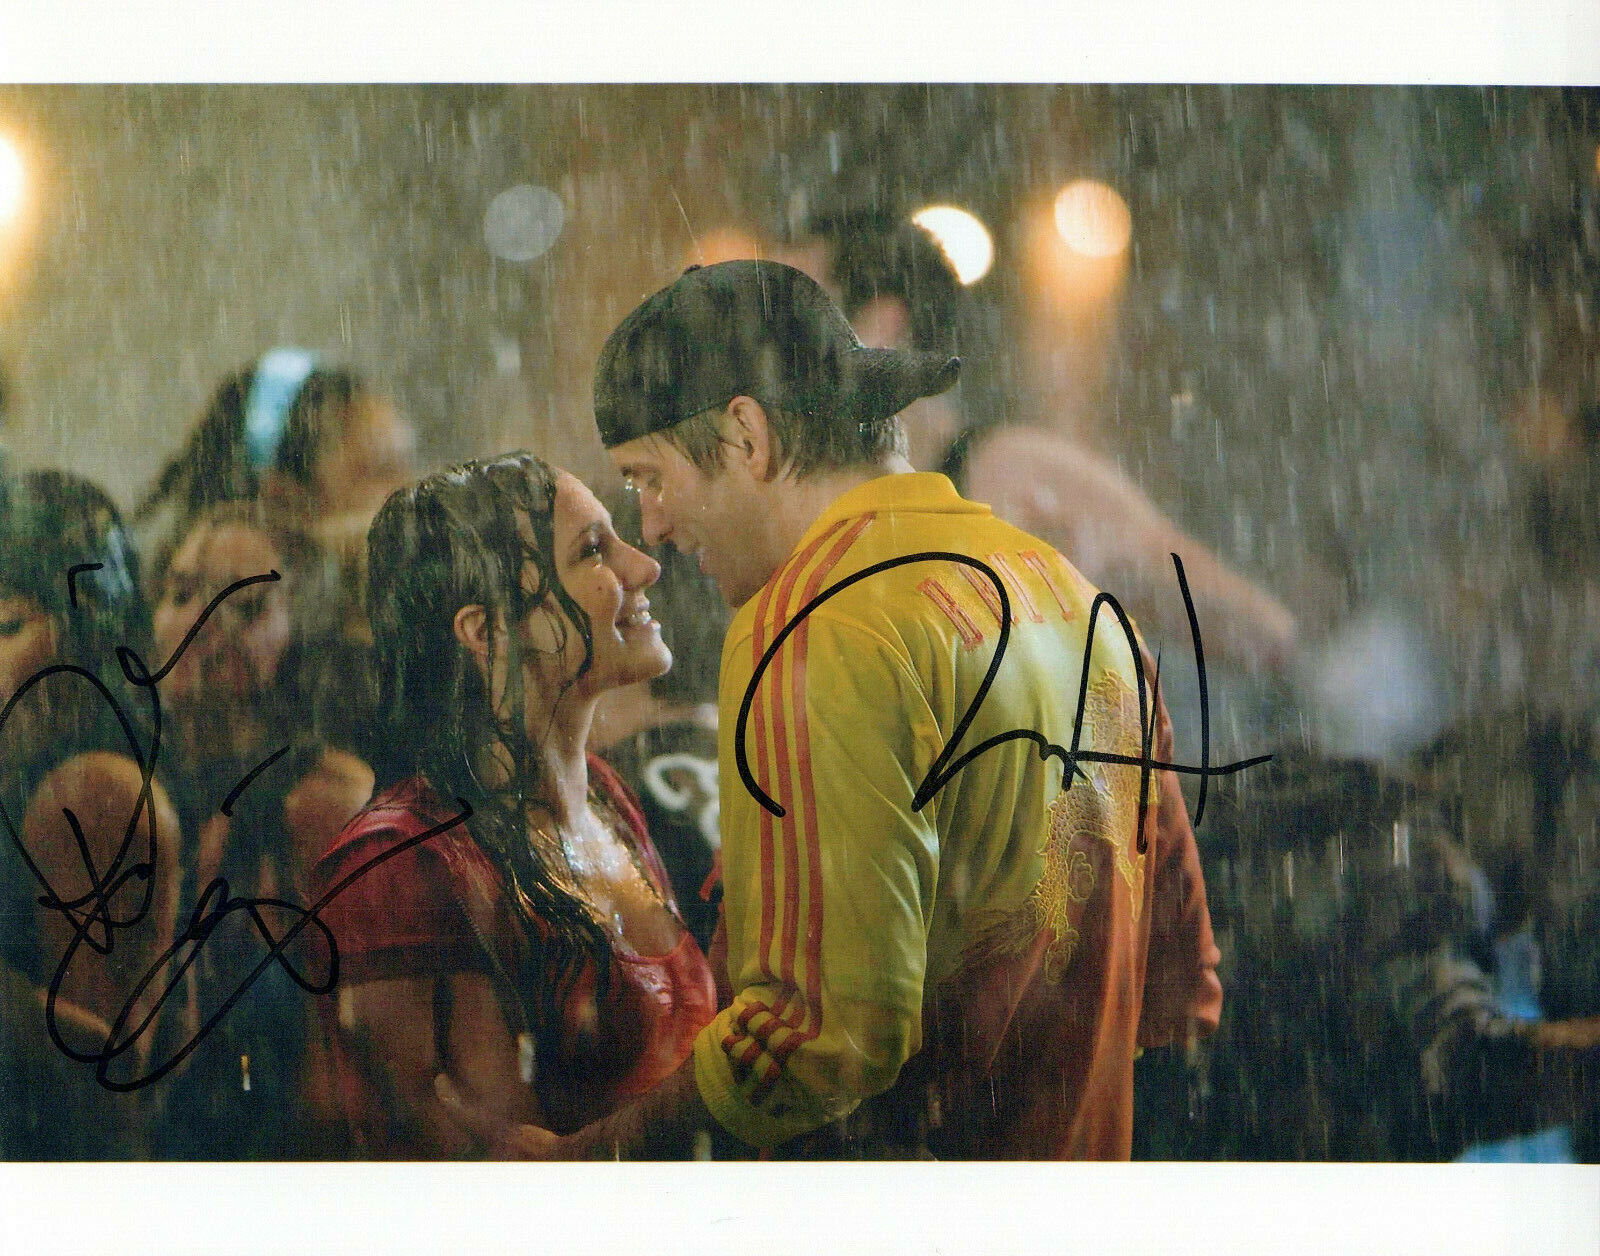 Step Up 2 The Streets autographed Photo Poster painting signed 8x10 #6 Rob Hoffman Briana Evigan